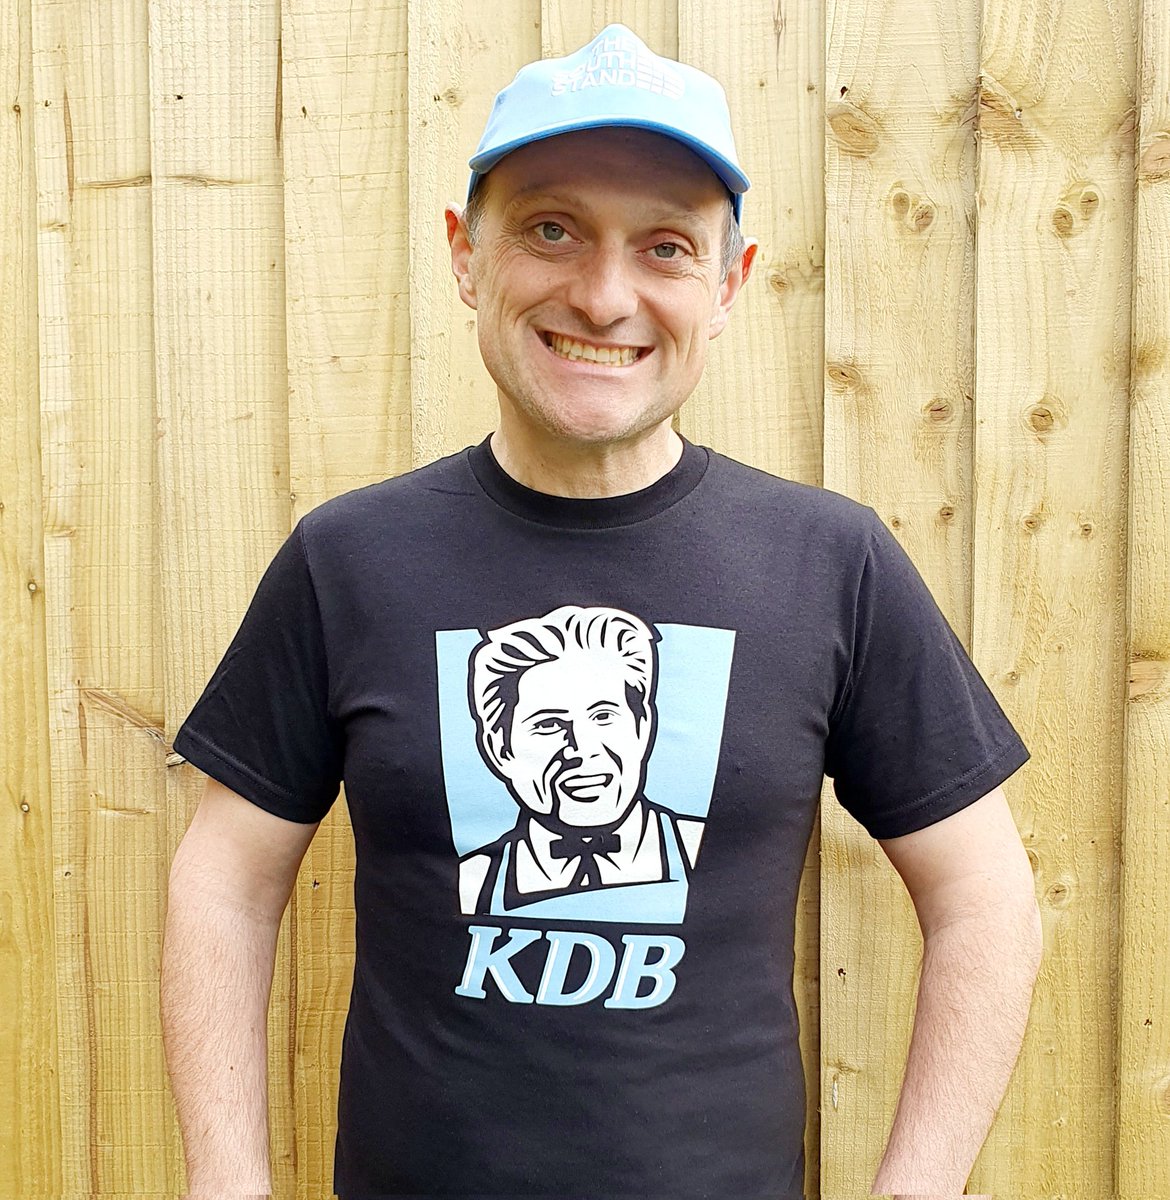 Matchday competition Win one of our new KDB tshirts Retweet to enter If City beat Chelsea tonight and Kev scores or assists we'll give away a tshirt to a follower who retweets Good luck and cmon City Check out our new tshirts here thegingerwigscitygifts.com/new-in-36-c.asp